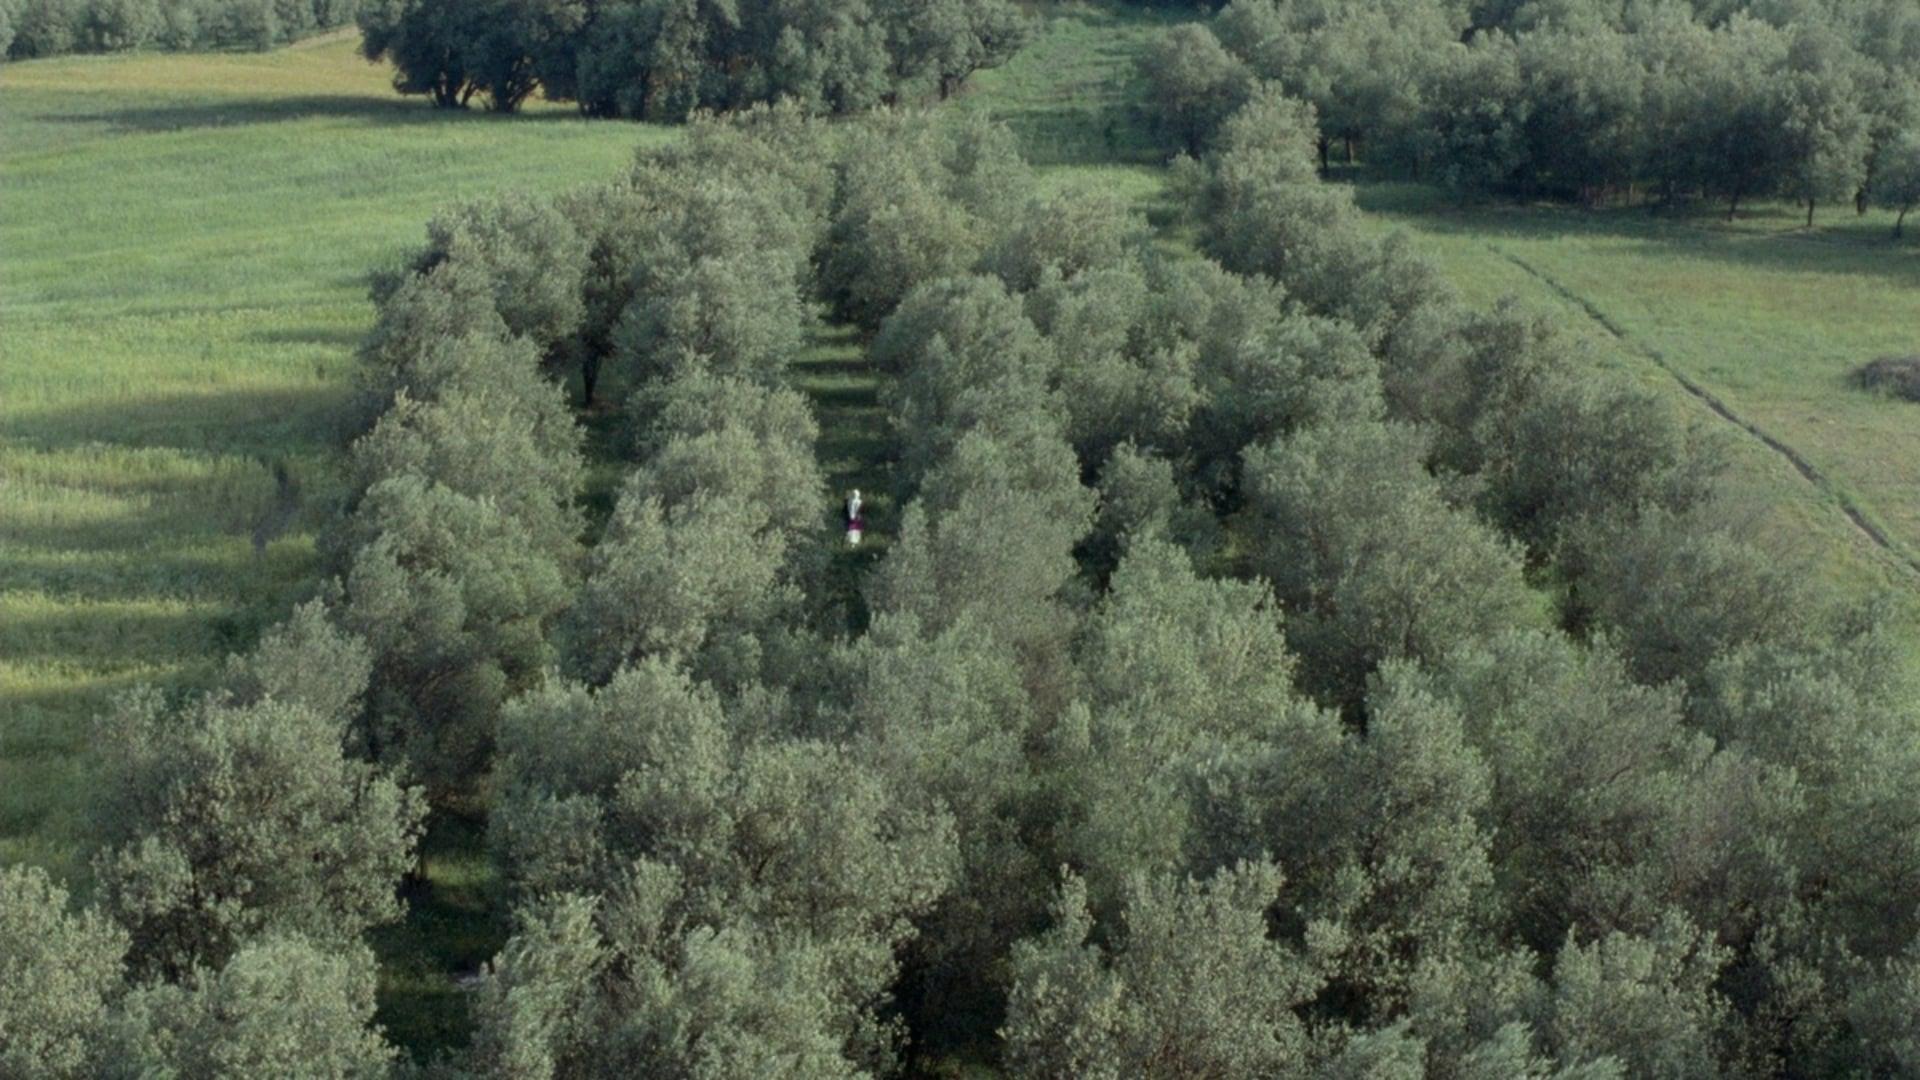 Through the Olive Trees backdrop